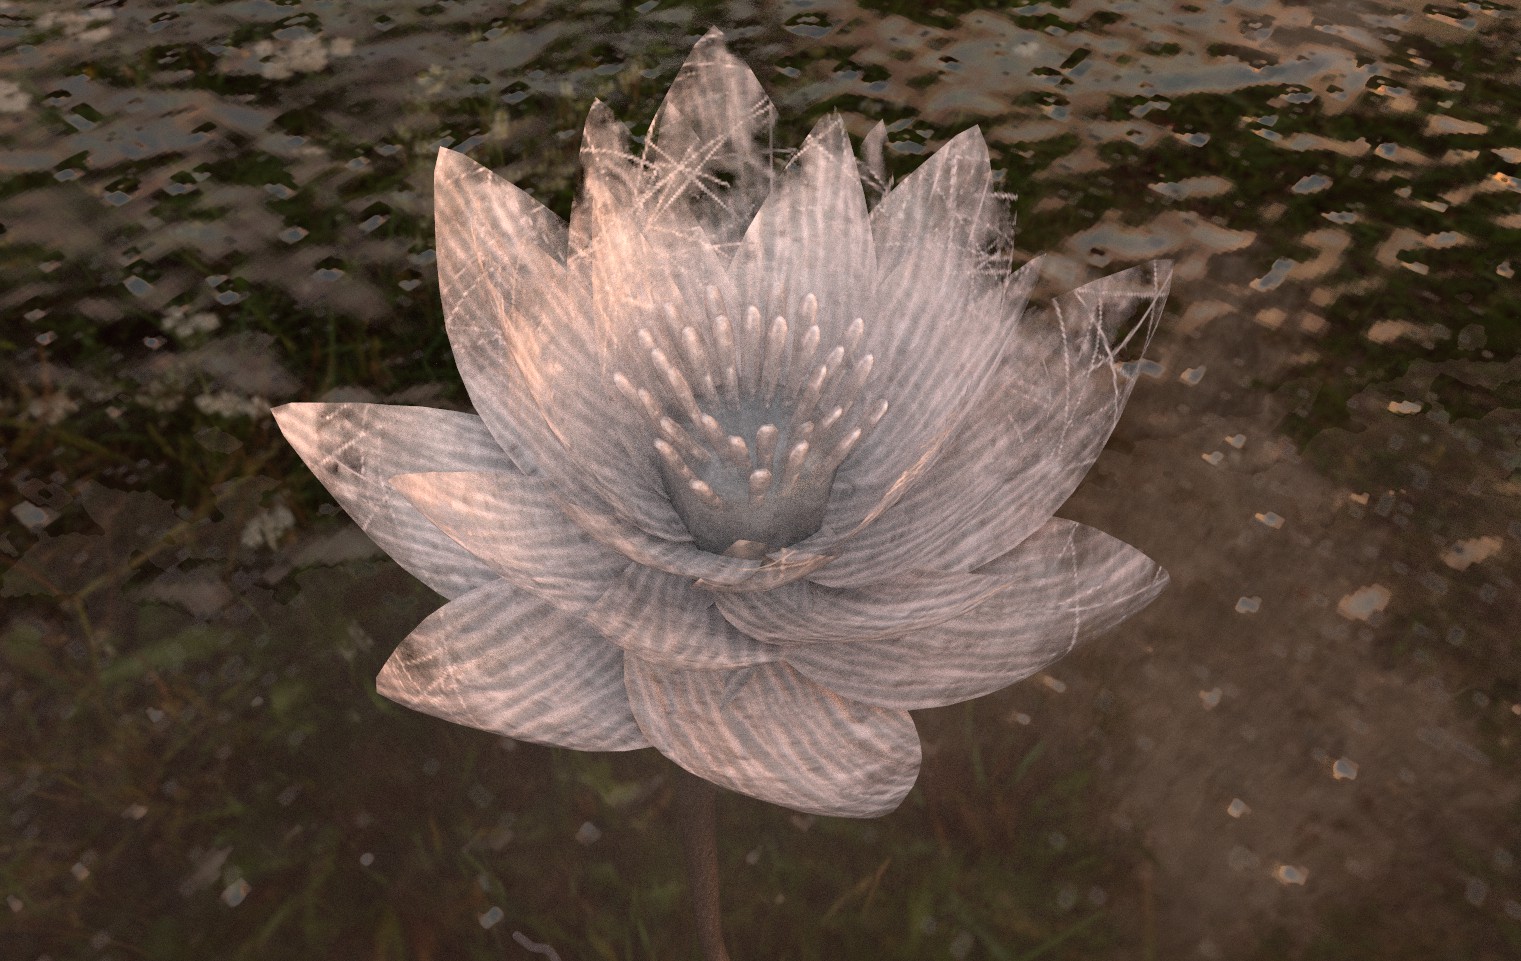 As the lilies bloom – experimental VR project